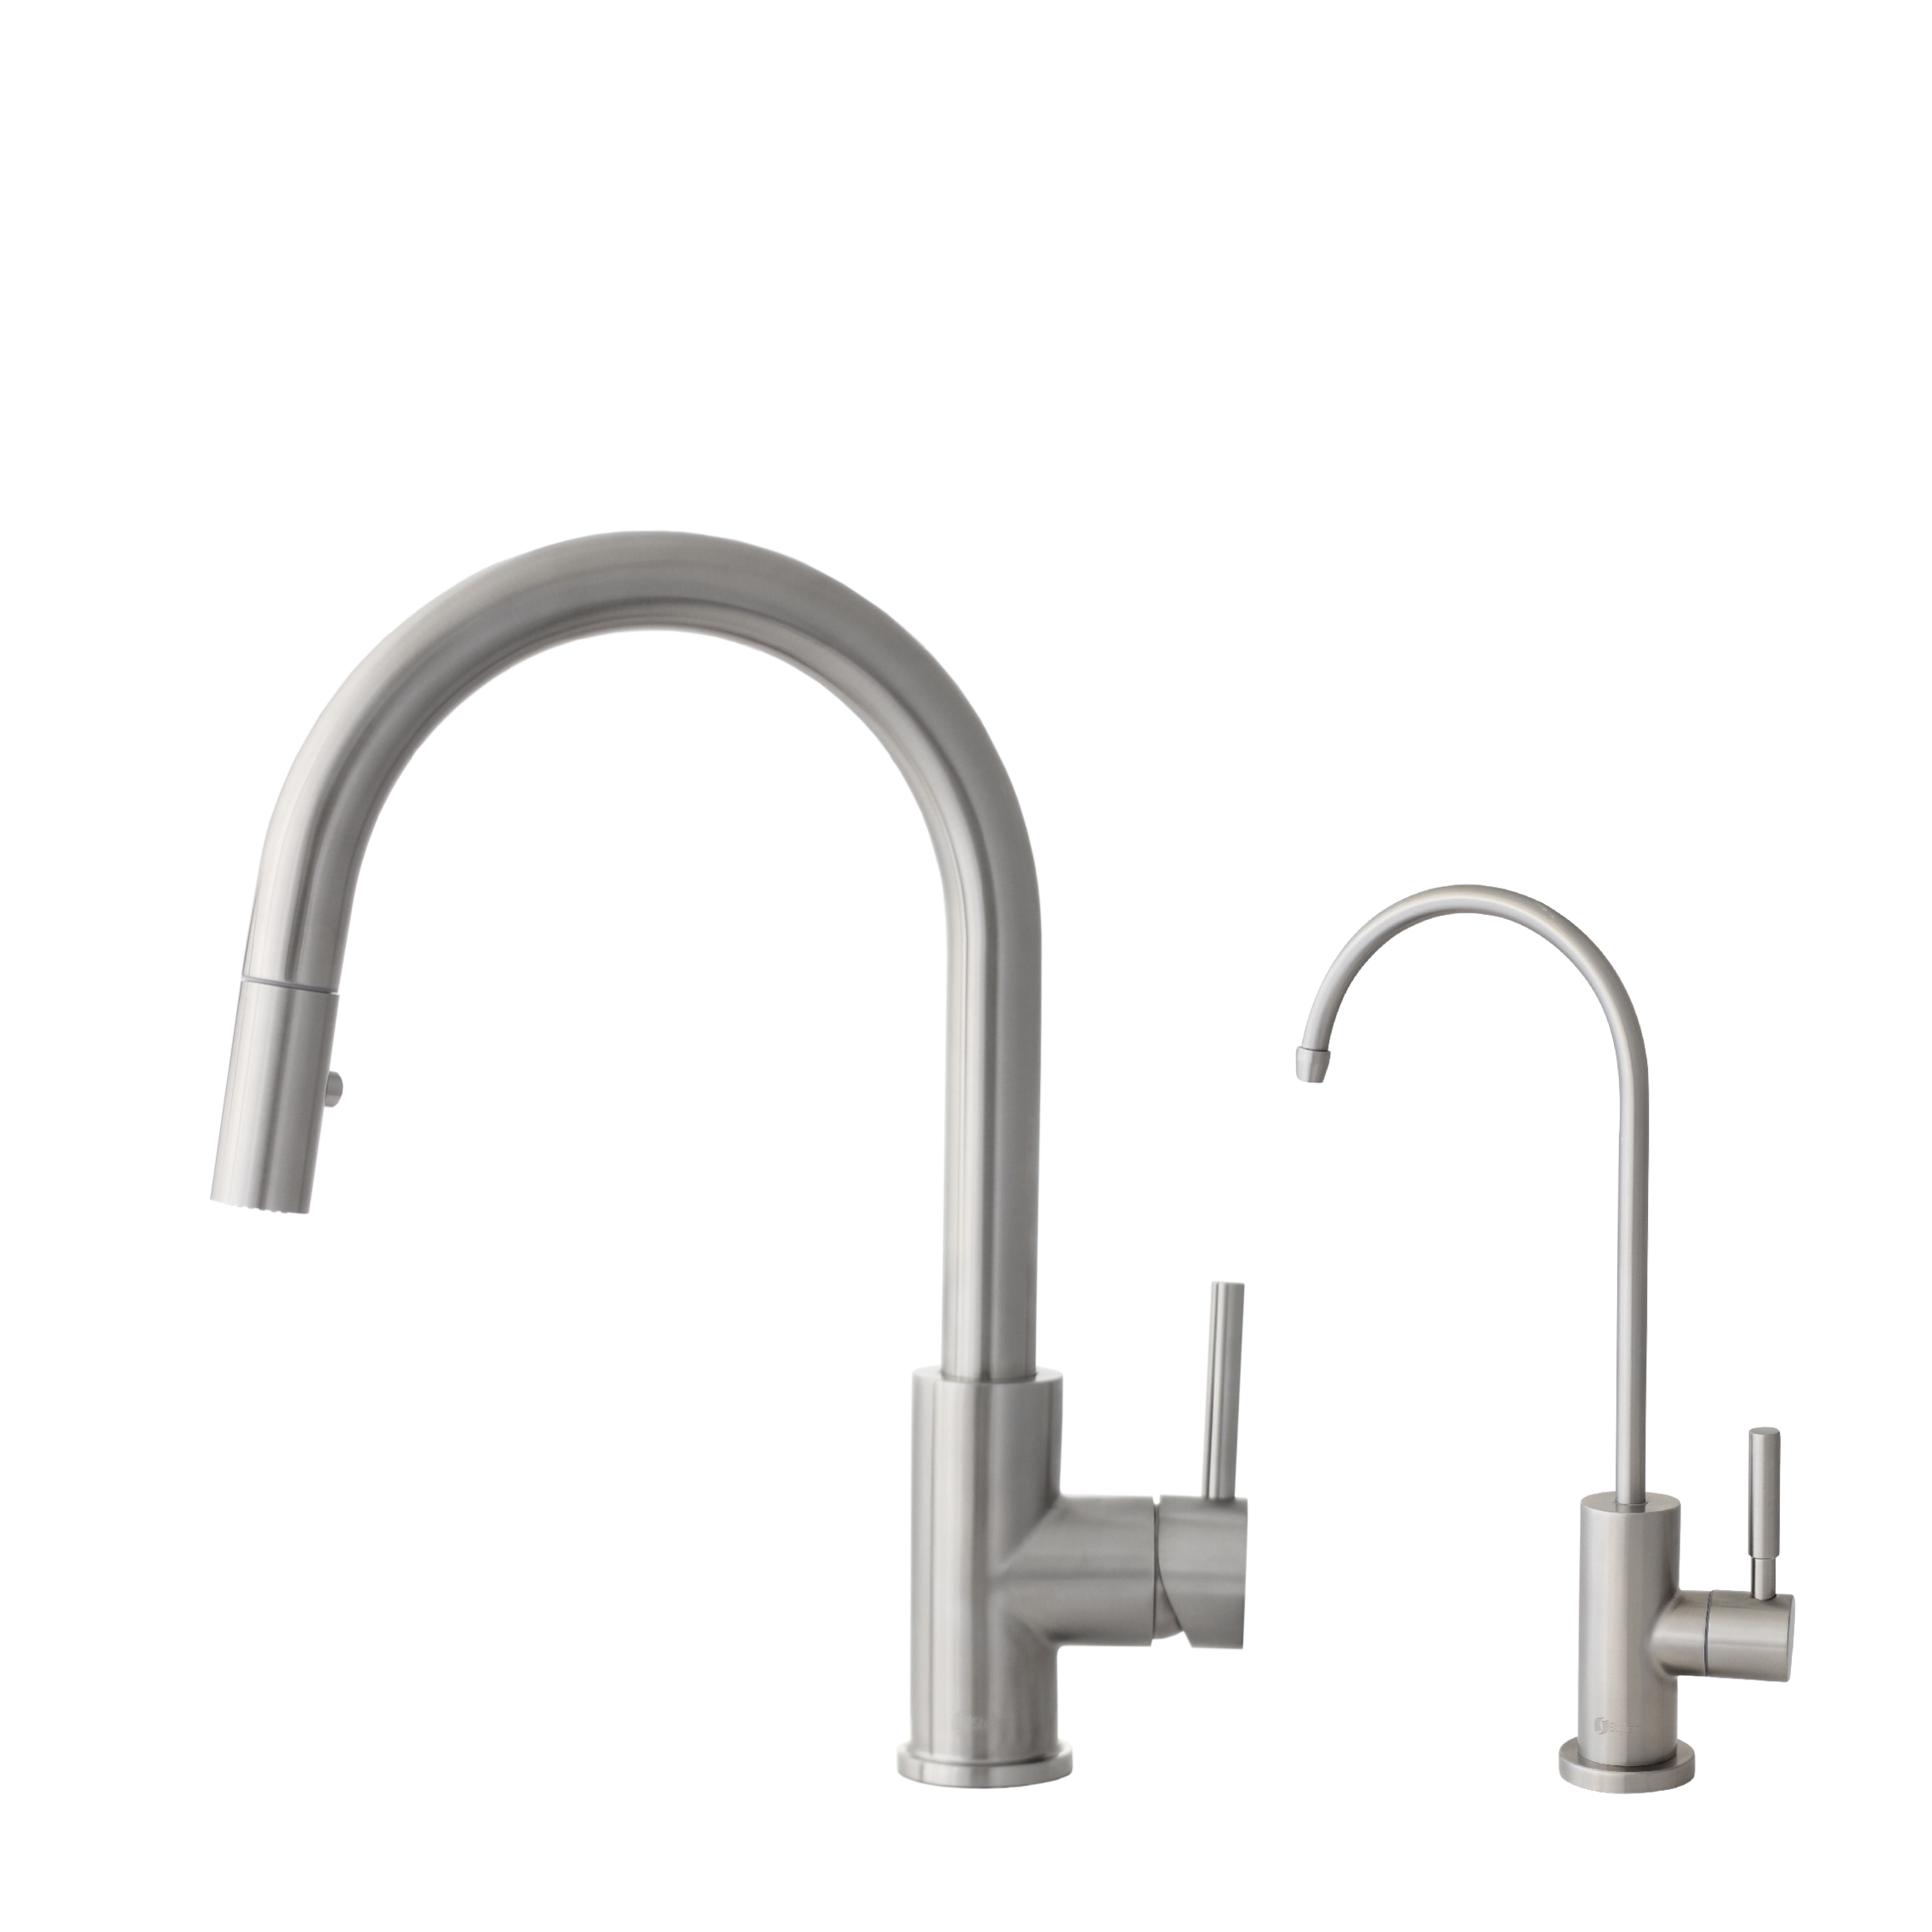 STYLISH K131SK142S 14 1/8 INCH STAINLESS STEEL PULL DOWN KITCHEN FAUCET WITH WATER TAP